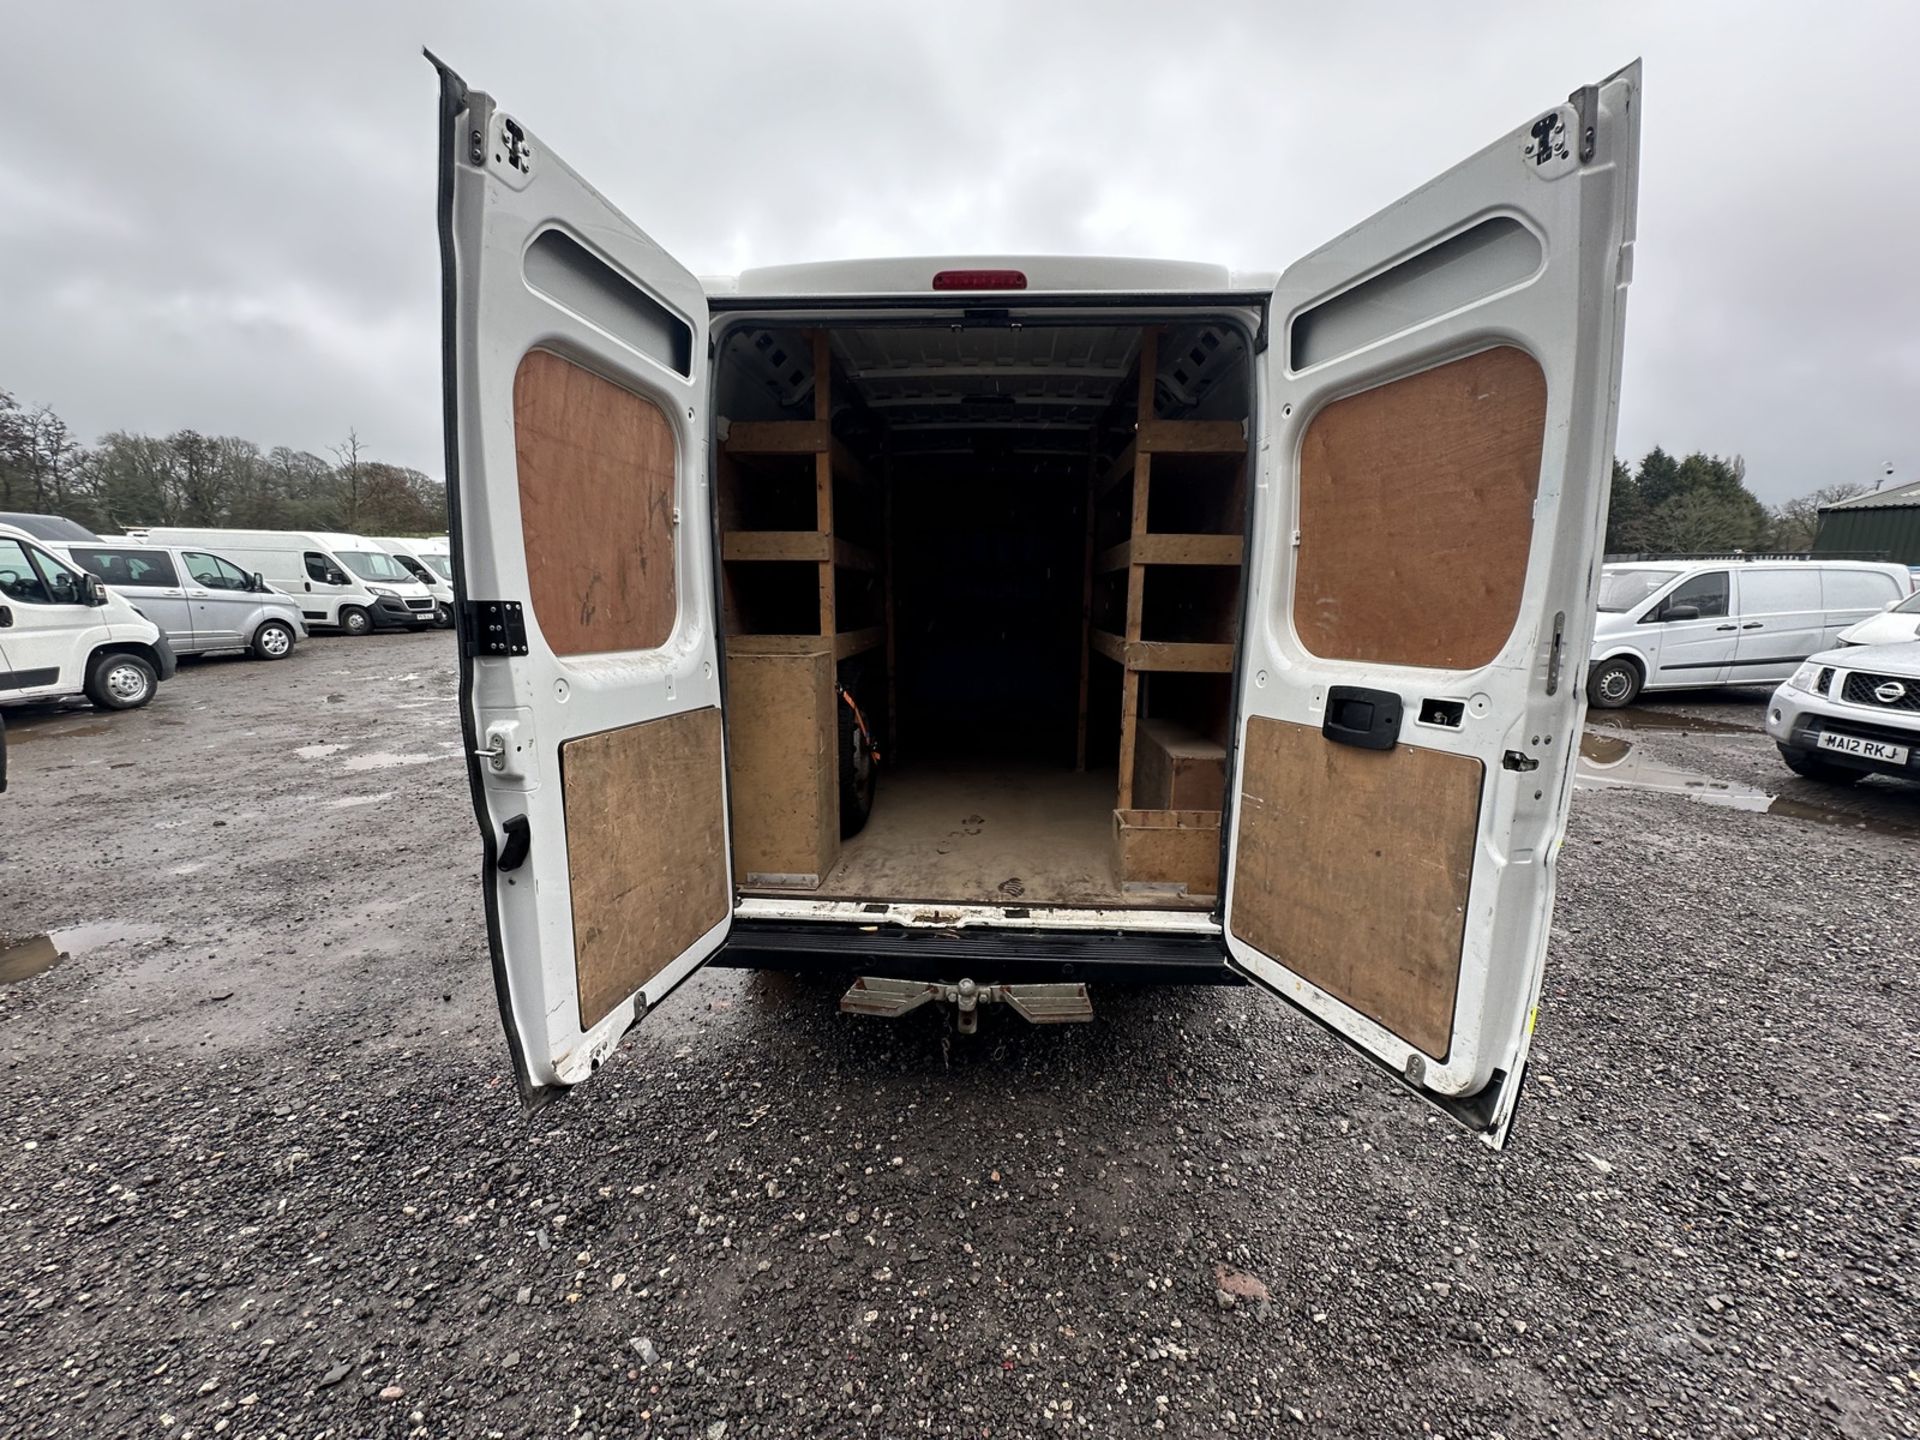 WHITE WORKHORSE: 2019 PANEL VAN, READY FOR DUTY - Image 16 of 18